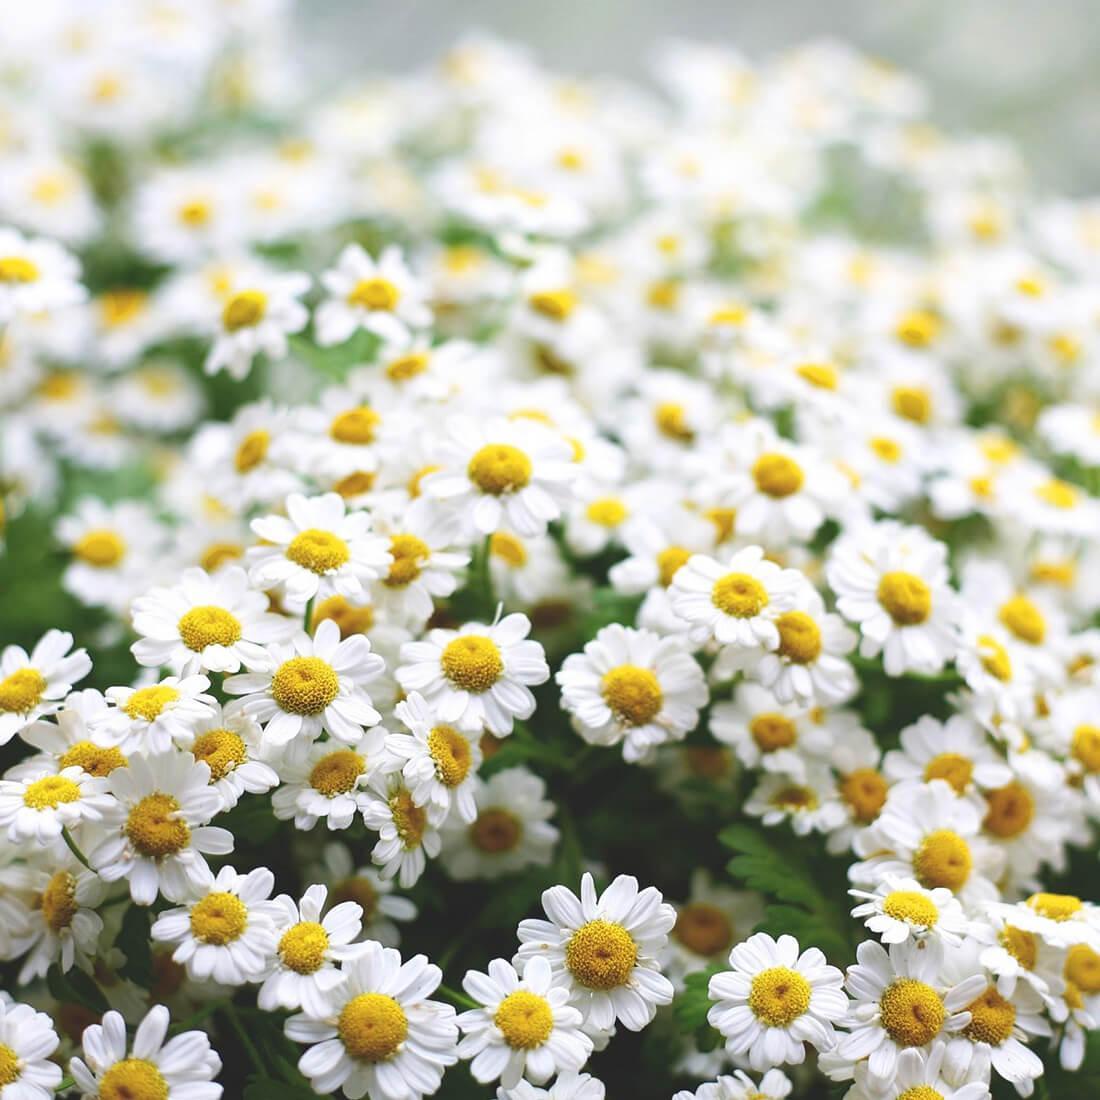 Daisy Live Wallpaper for Android